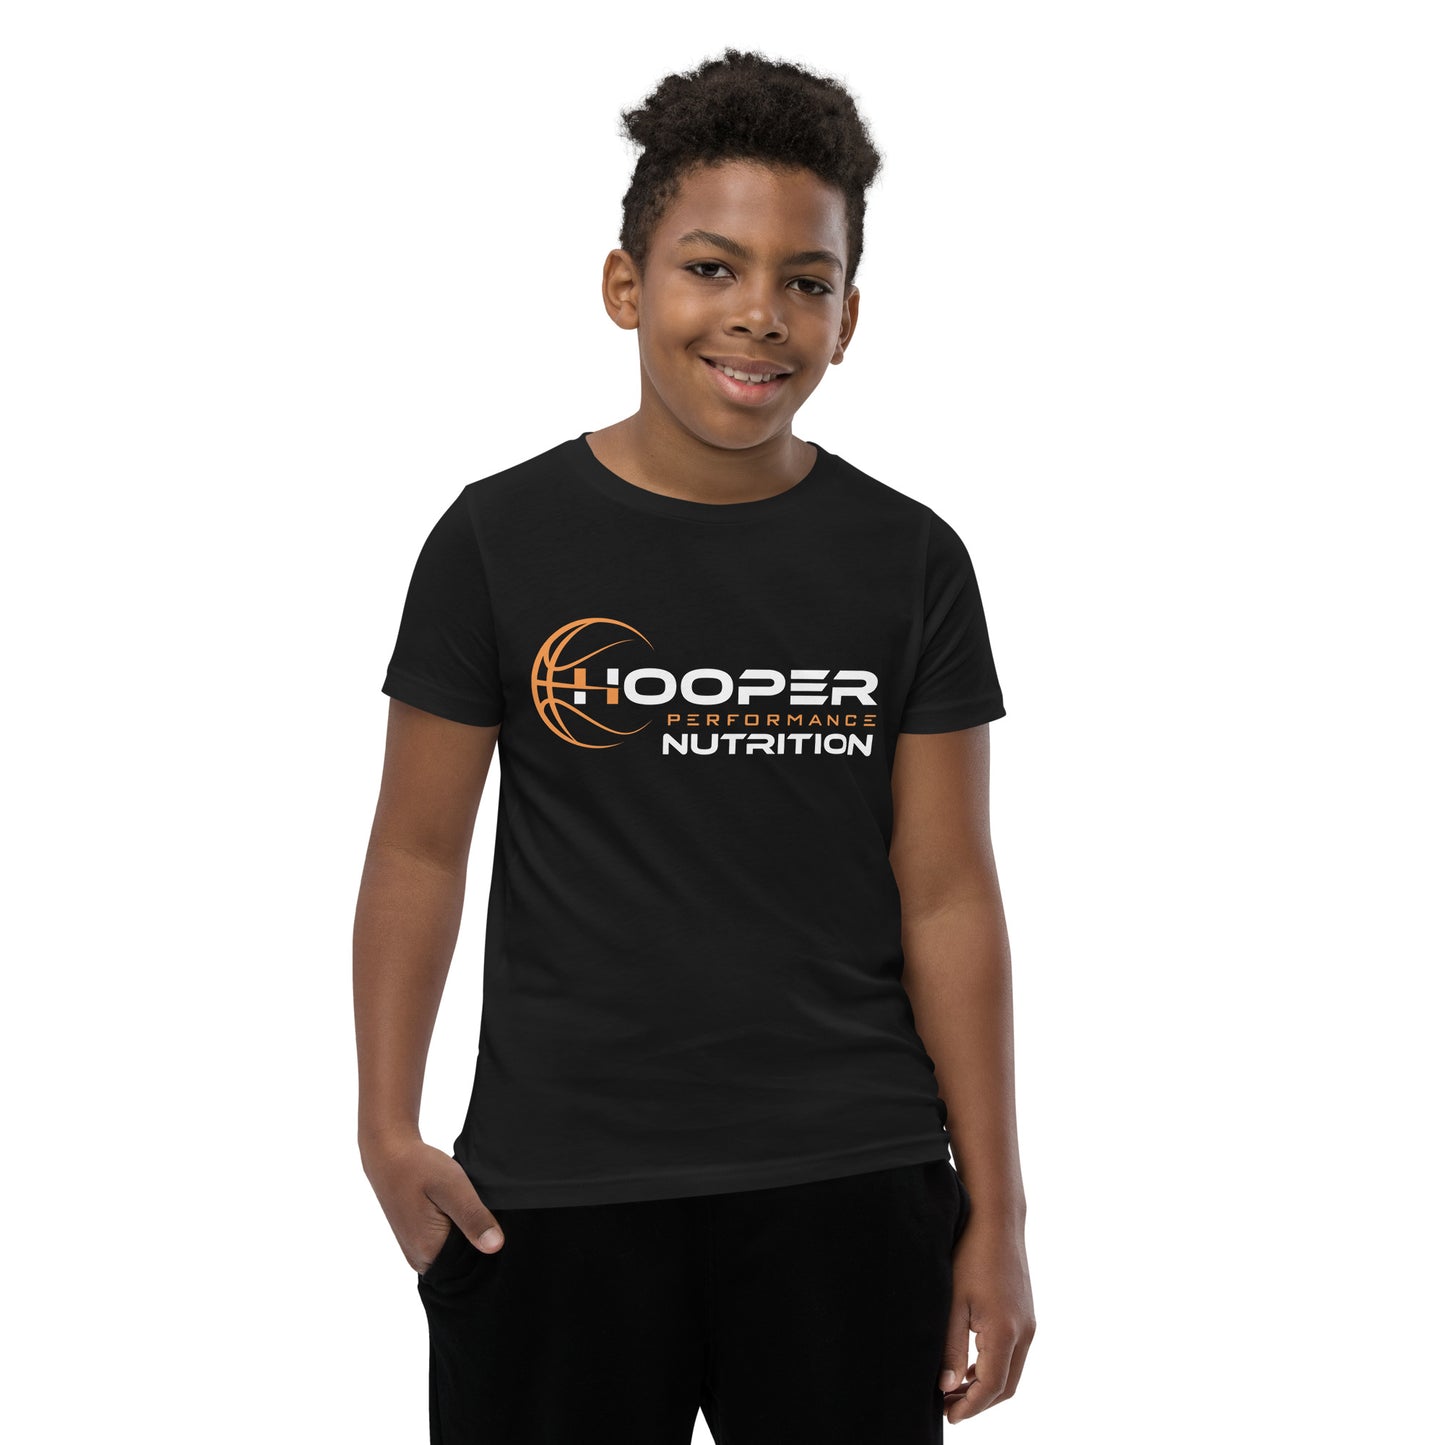 Hooper performance nutrition Youth Short Sleeve T-Shirt-relaxed fit for kids